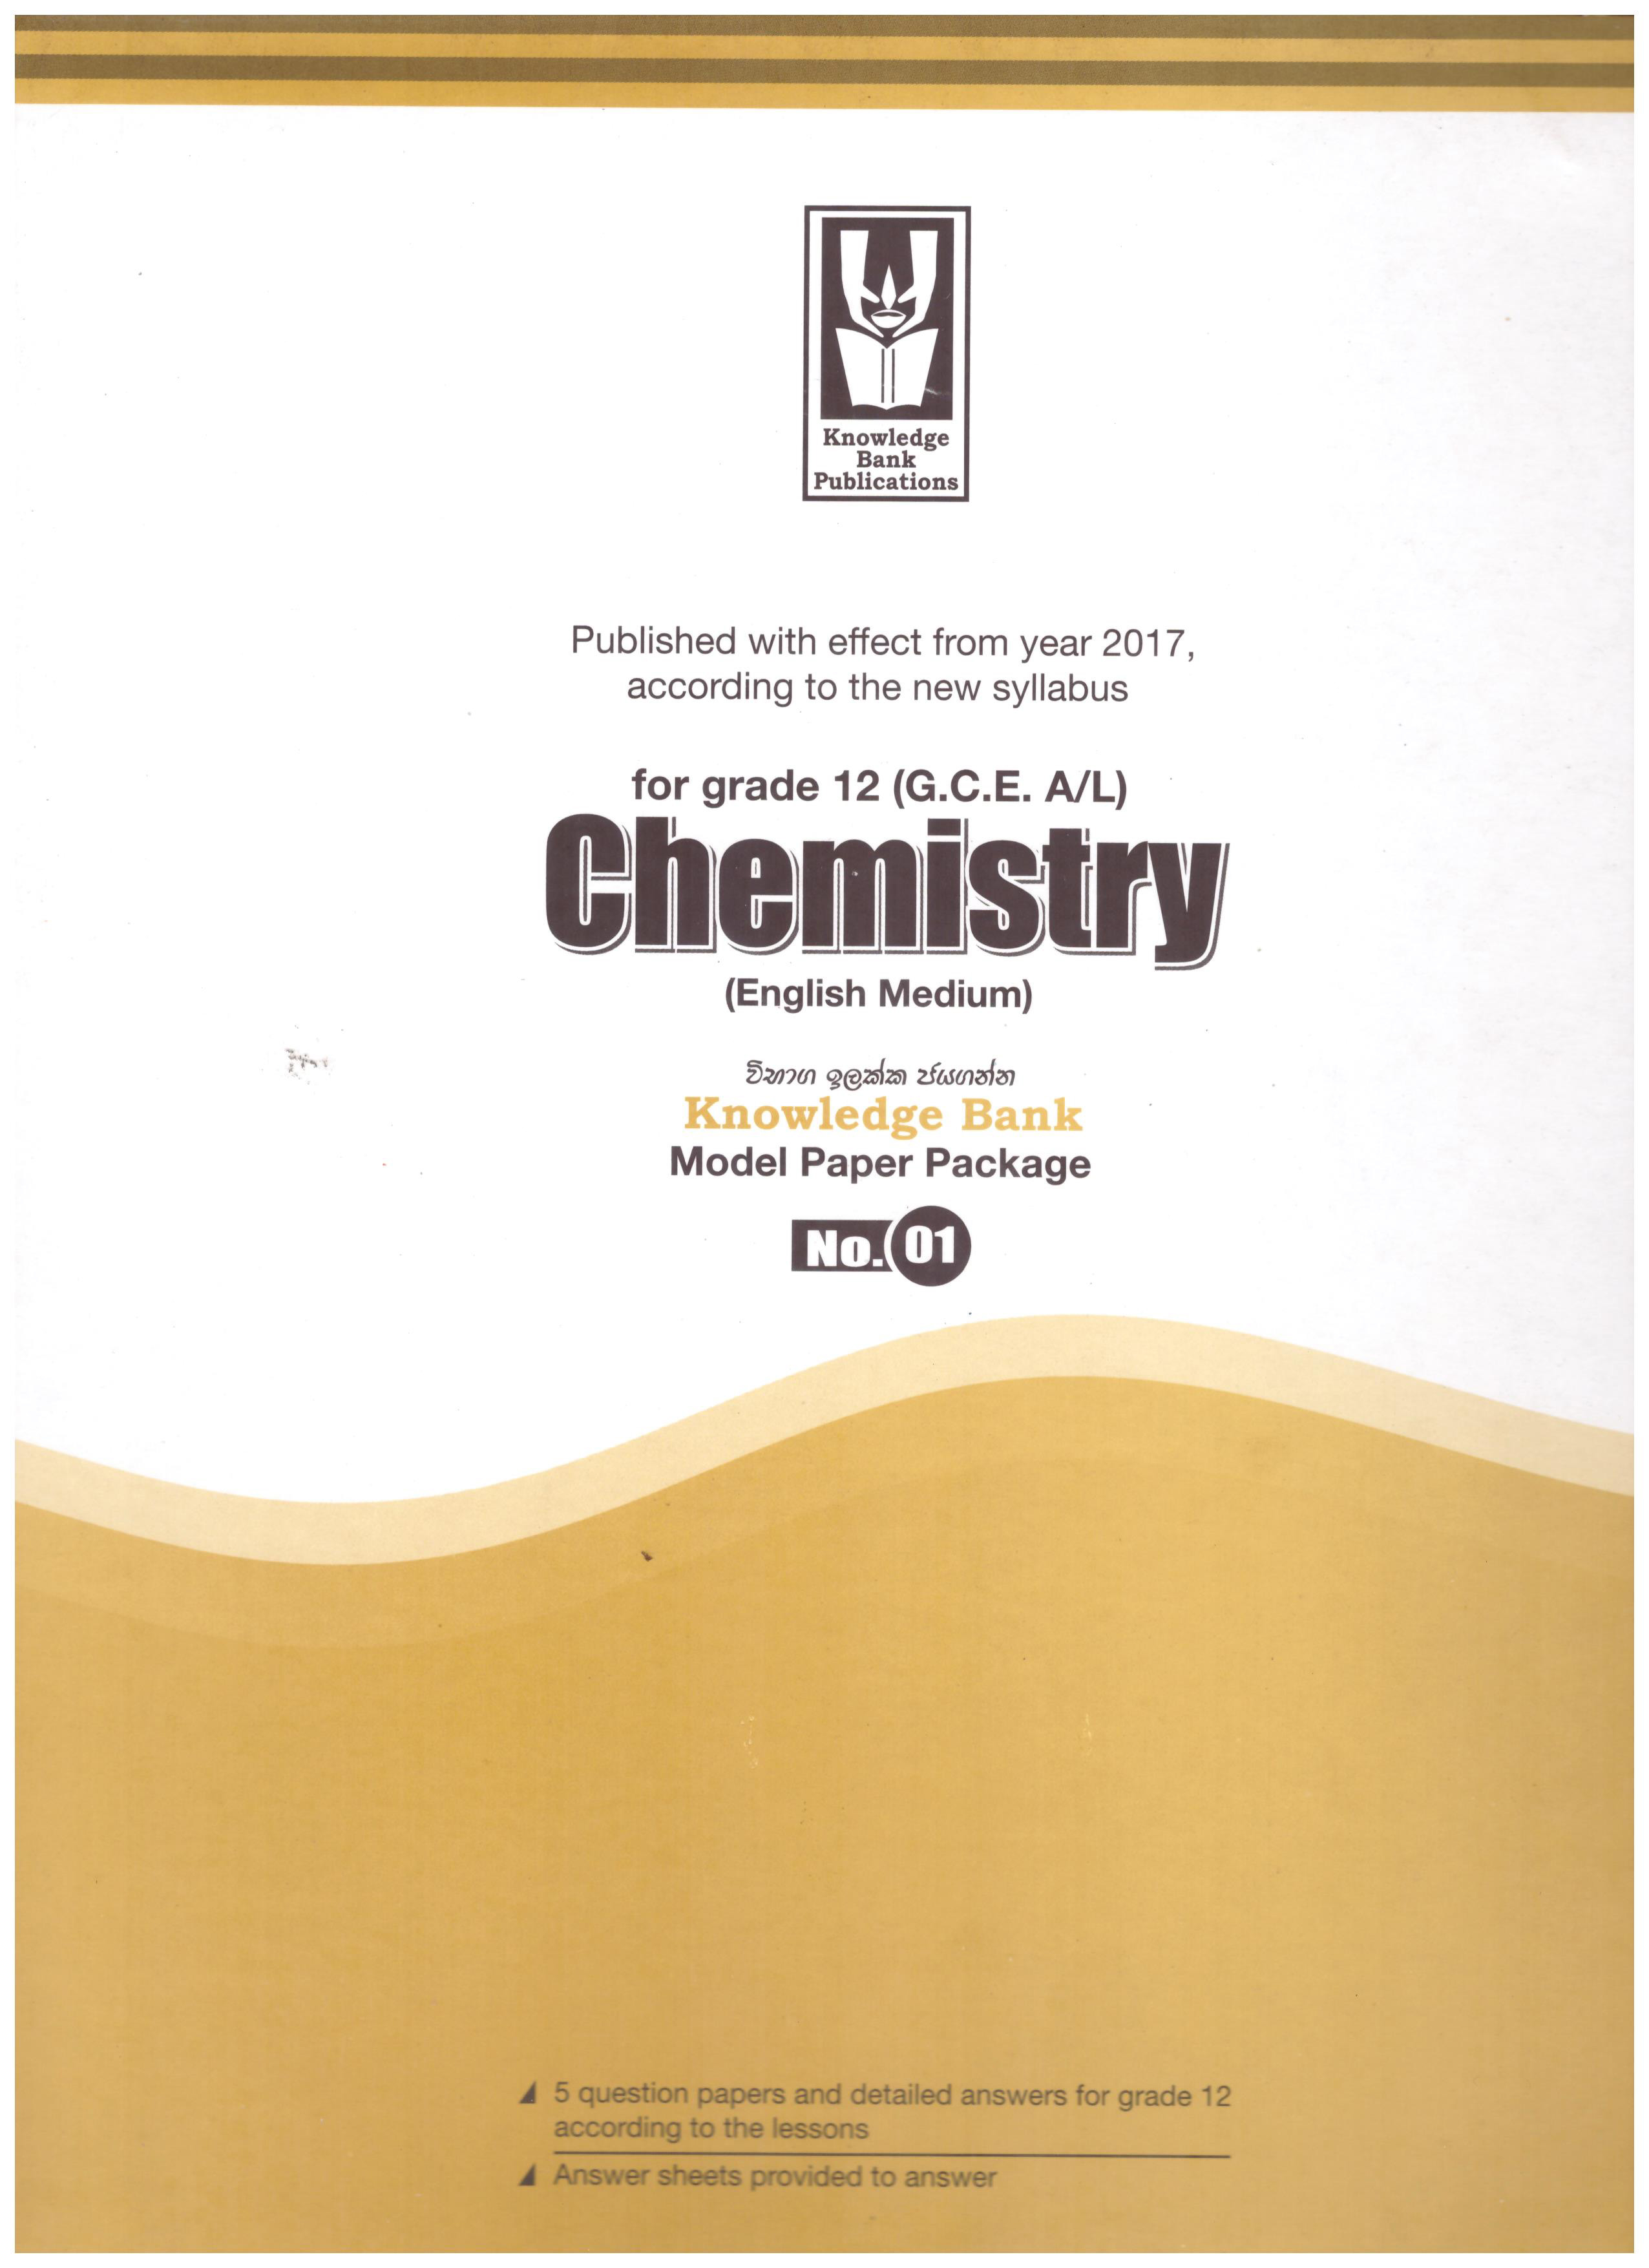 Knowledge Bank A/L Chemistry No.1 (For Grade 12) Model Paper Package